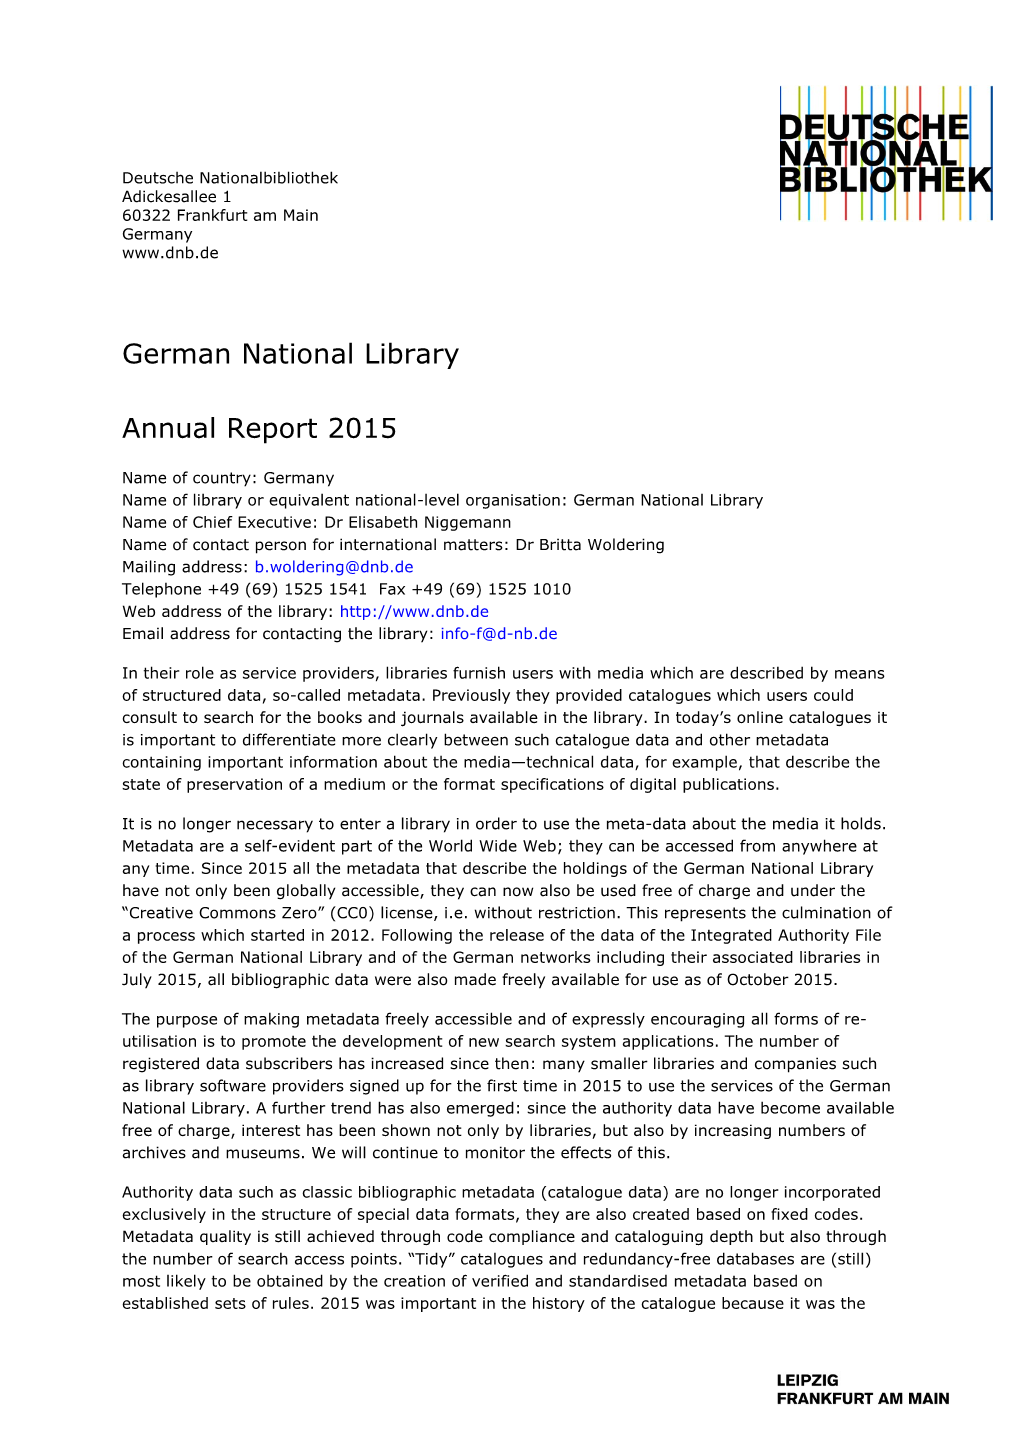 German National Library Annual Report 2015